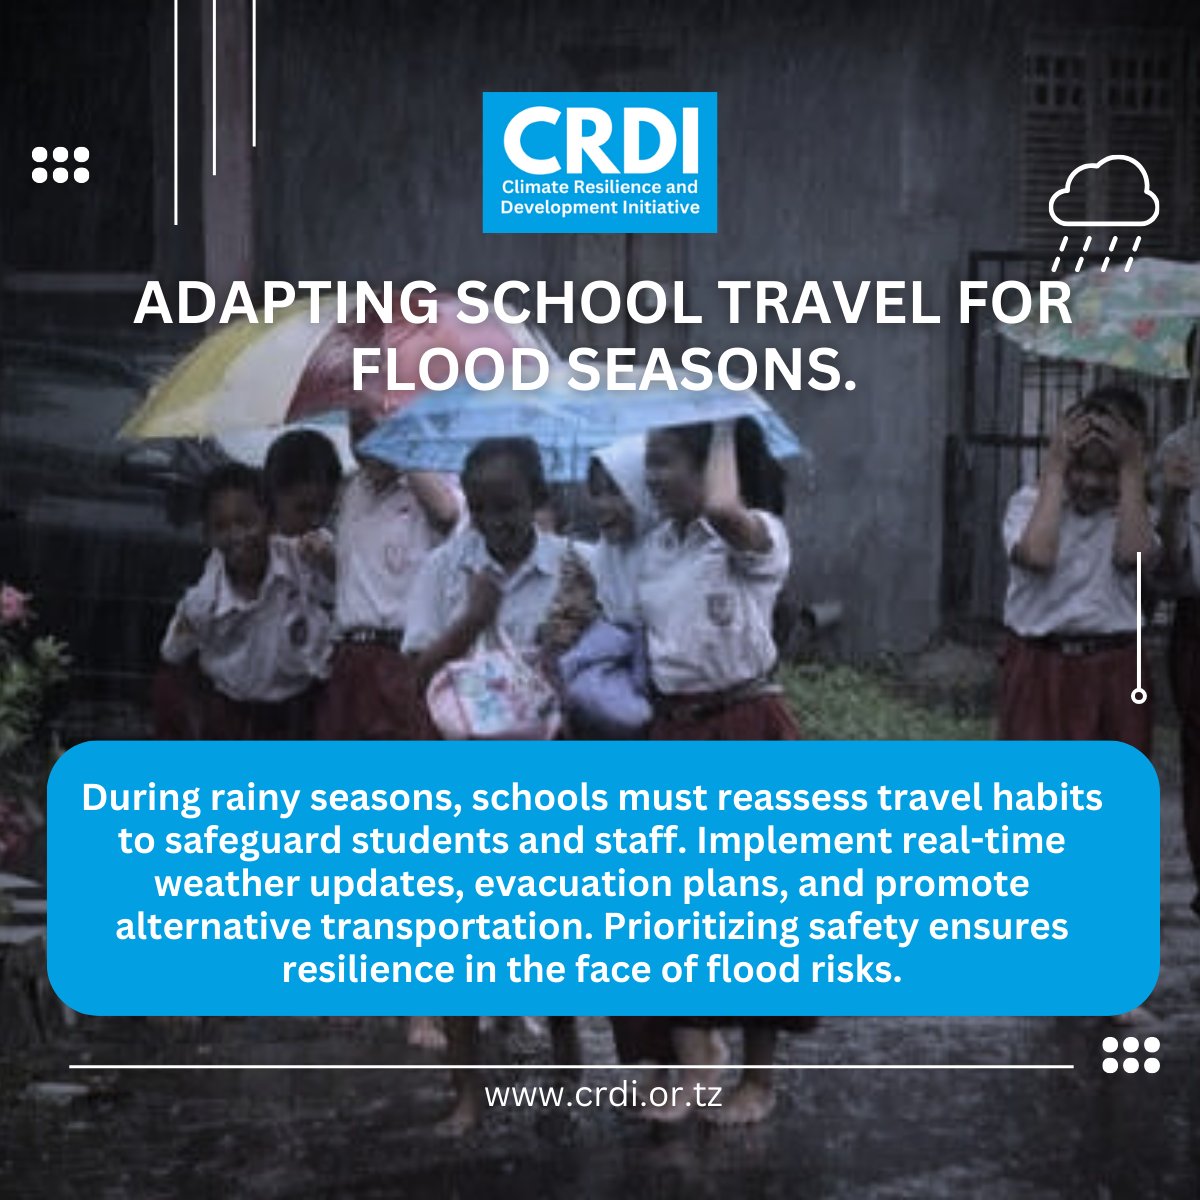 Adapting School Travel for Flood Seasons 🚌
Prioritizing safety ensures resilience in the face of flood risks. 🌧️🏫 #FloodSafety #SchoolTravel #Resilience #CRDI #ClimateActionNow #climatechange